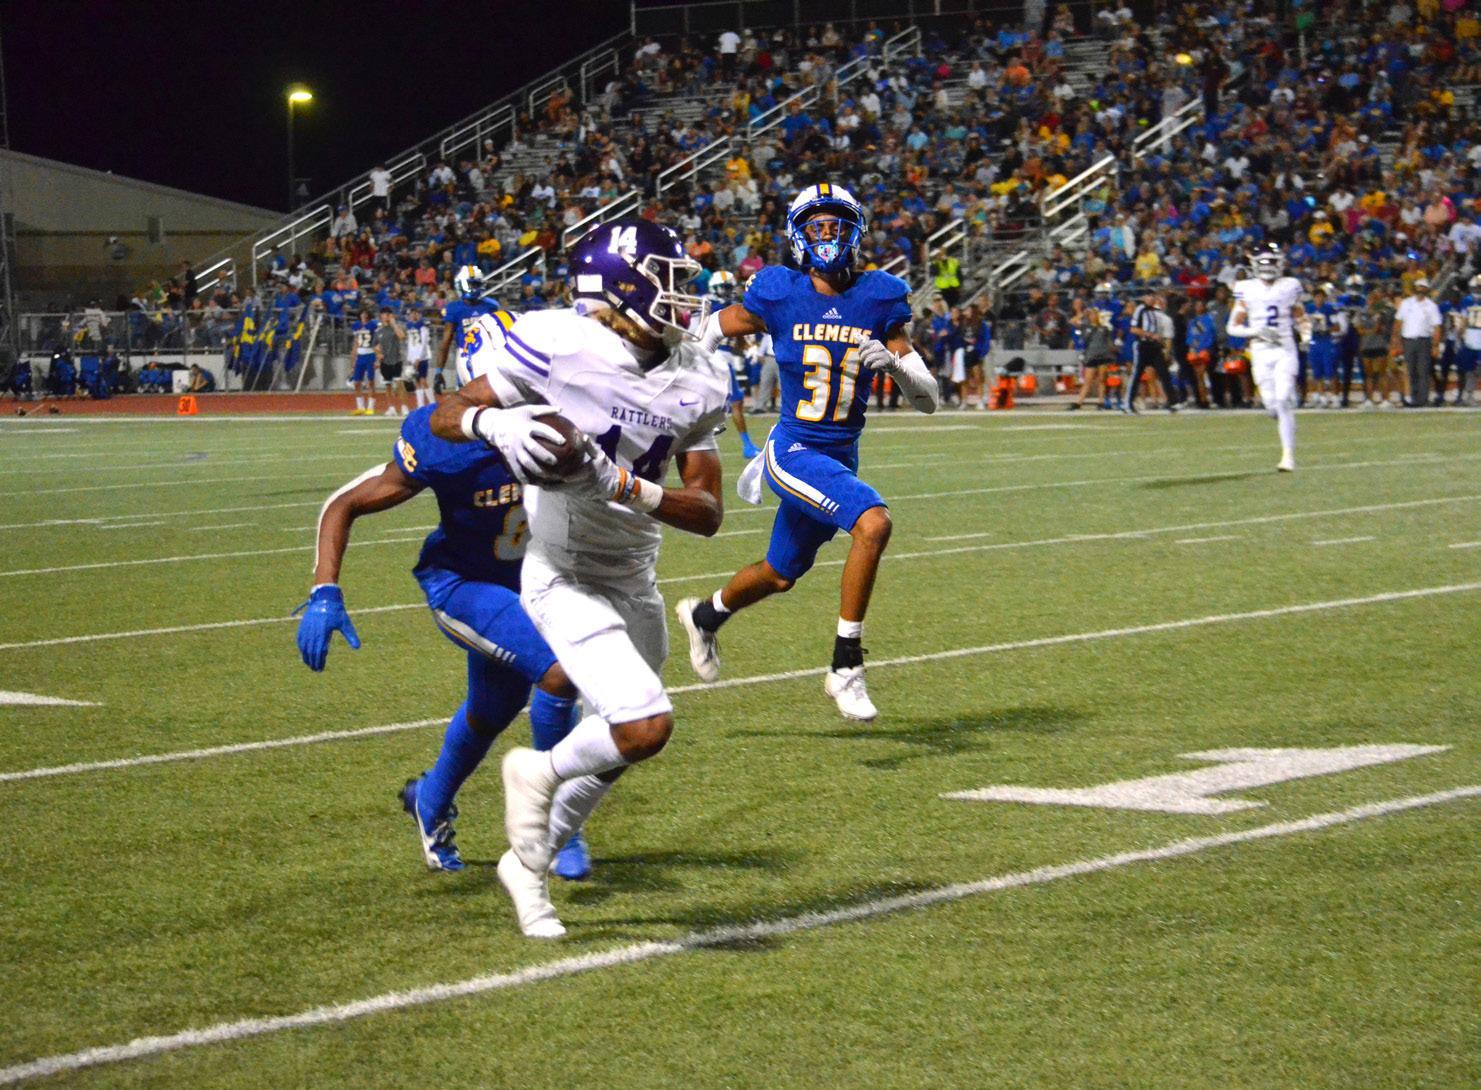 San Marcos offers winning Clemens every possible punch